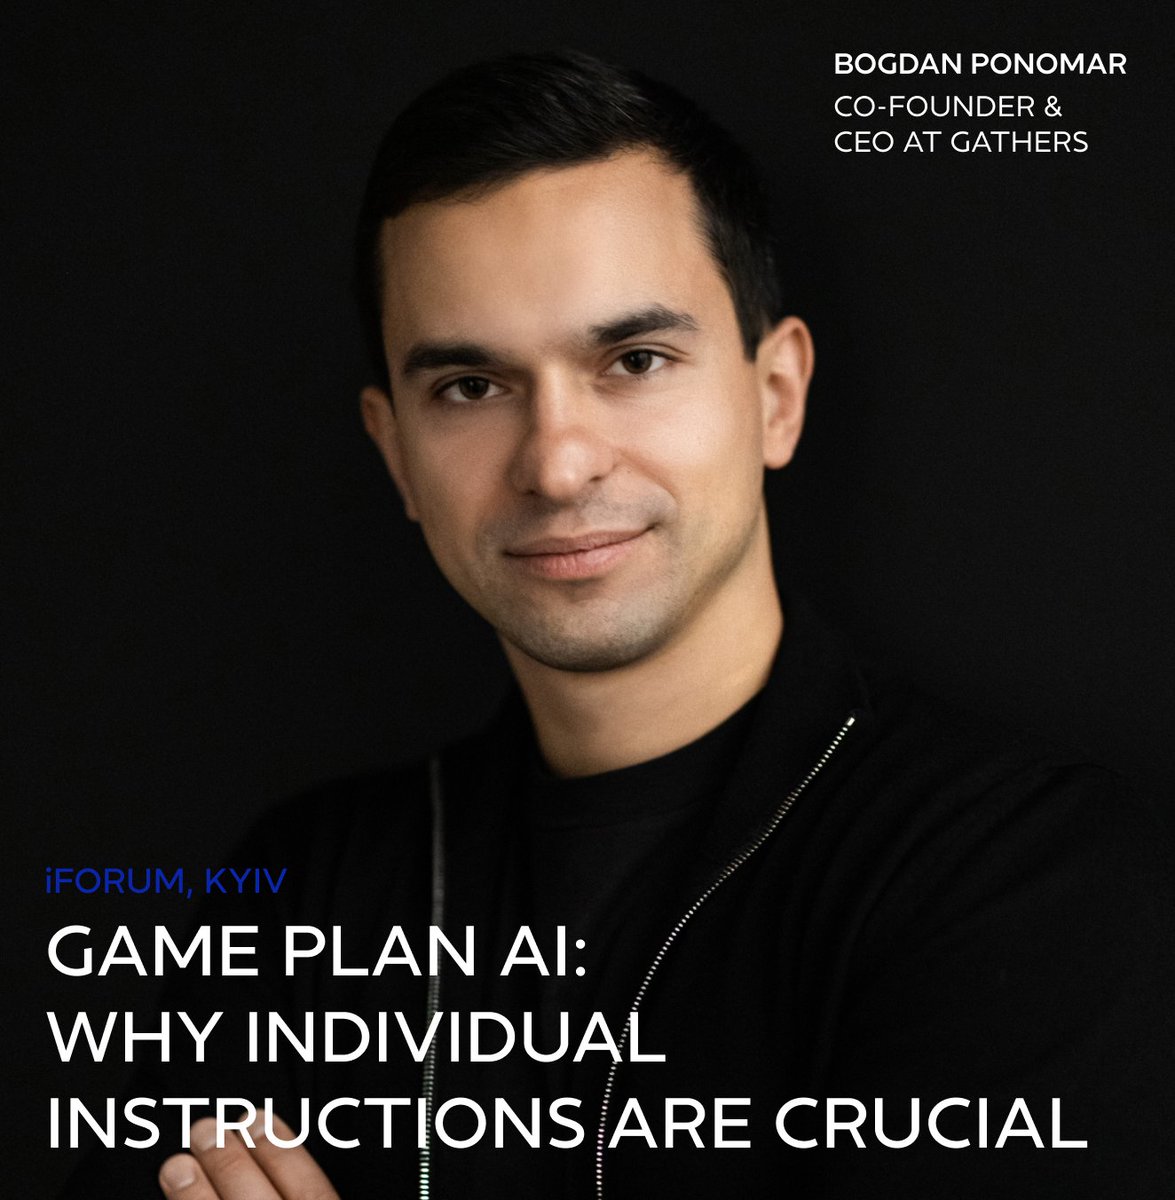 🗣️ Excited to announce that our co-founder & CEO, @BPonomar, will give a speech at @iforumua in Kyiv on Aug 10.

The topic is “Game Plan AI: Why individual instructions are crucial.”

Grab tickets here: lnkd.in/dx48g3Qf 
See you there! 🤝

P.S. The forum is in 🇺🇦